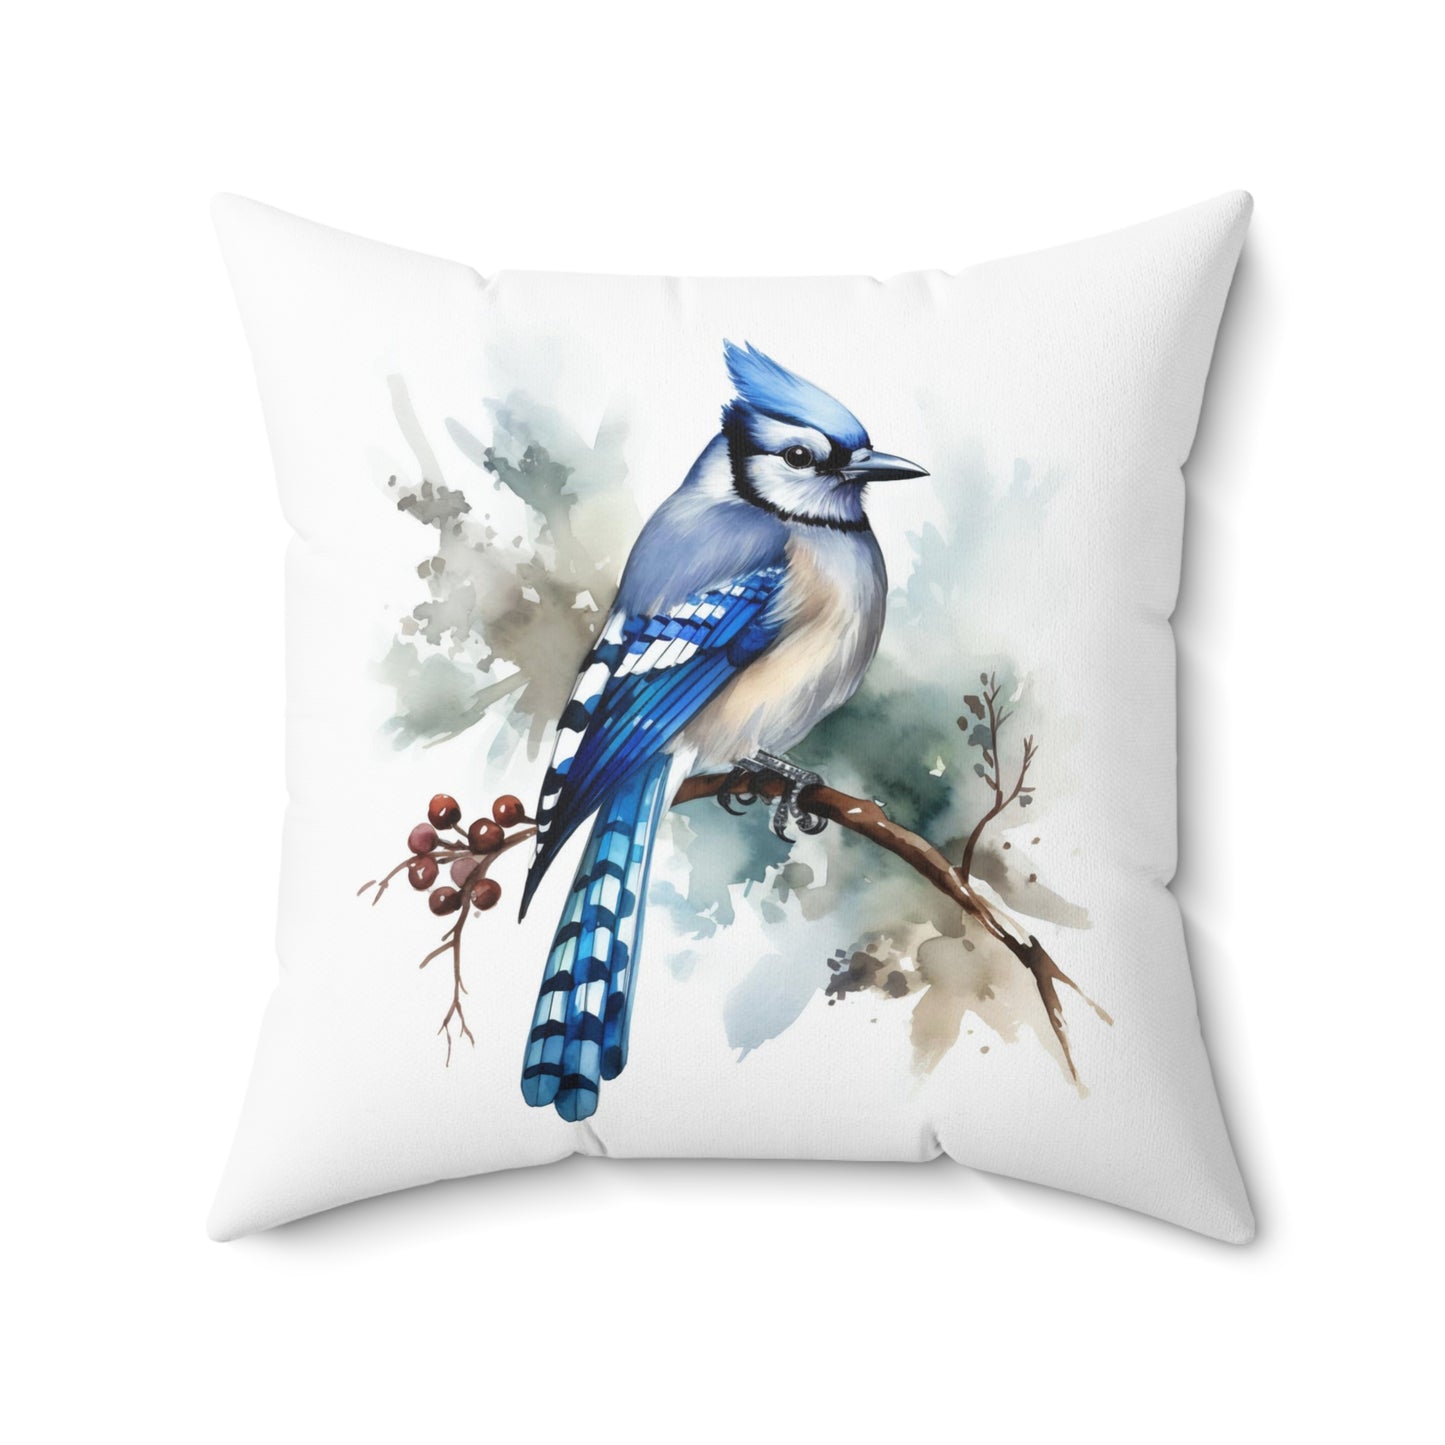 Blue Jay Throw Pillow, Watercolor Blue Jay Decorative Pillow, Square Bird Cushion, Double Sided Accent Pillow, Concealed Zipper